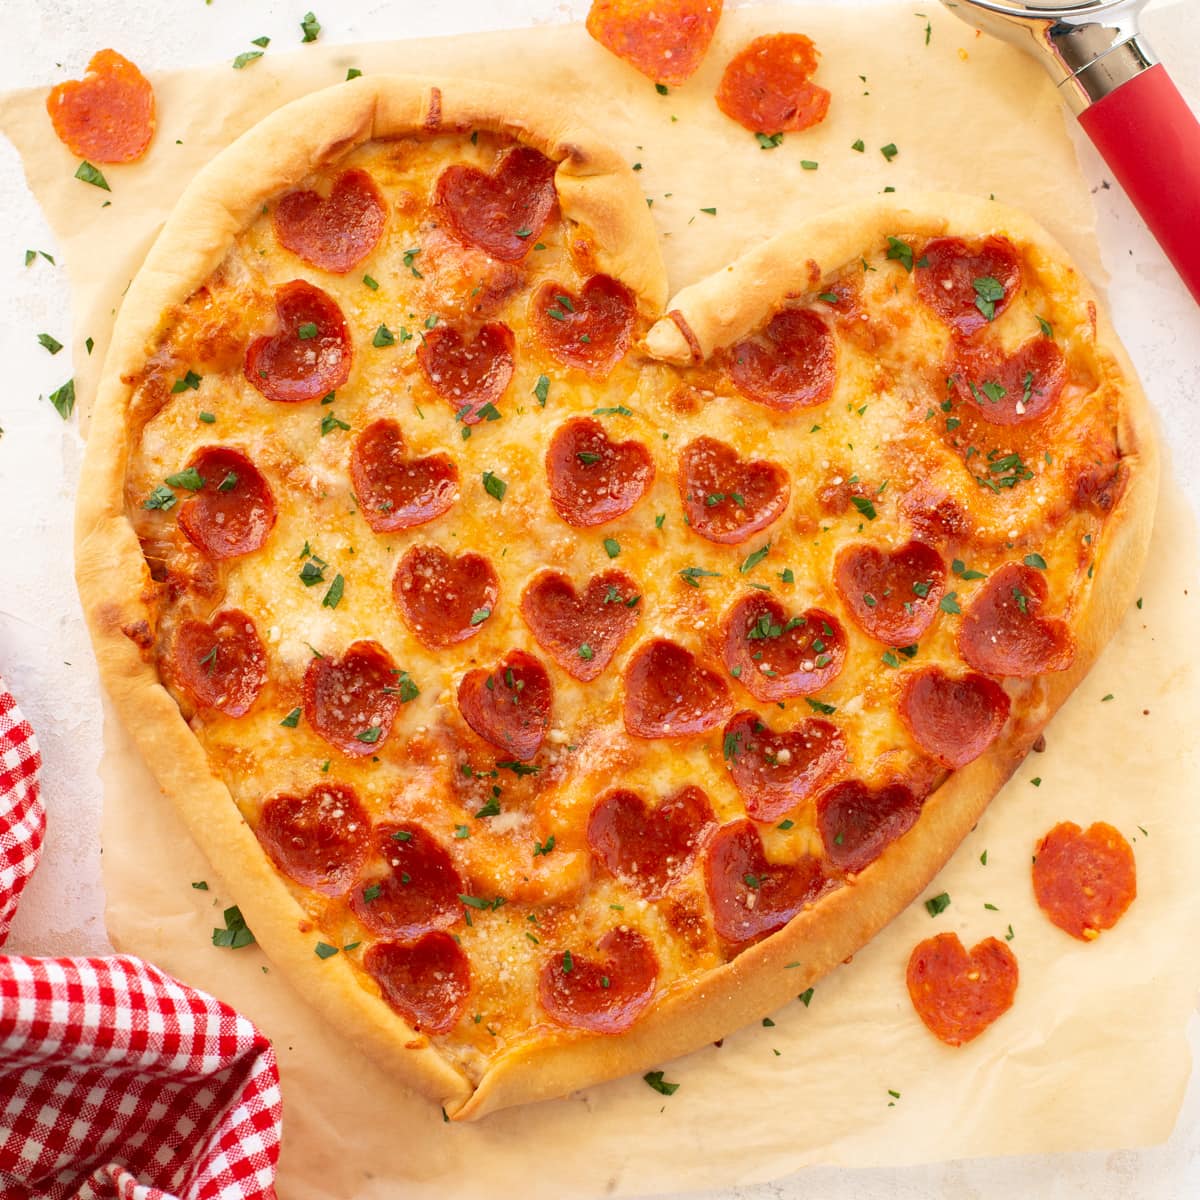 Quick dinner ideas - heart shaped pizza on a cutting board.